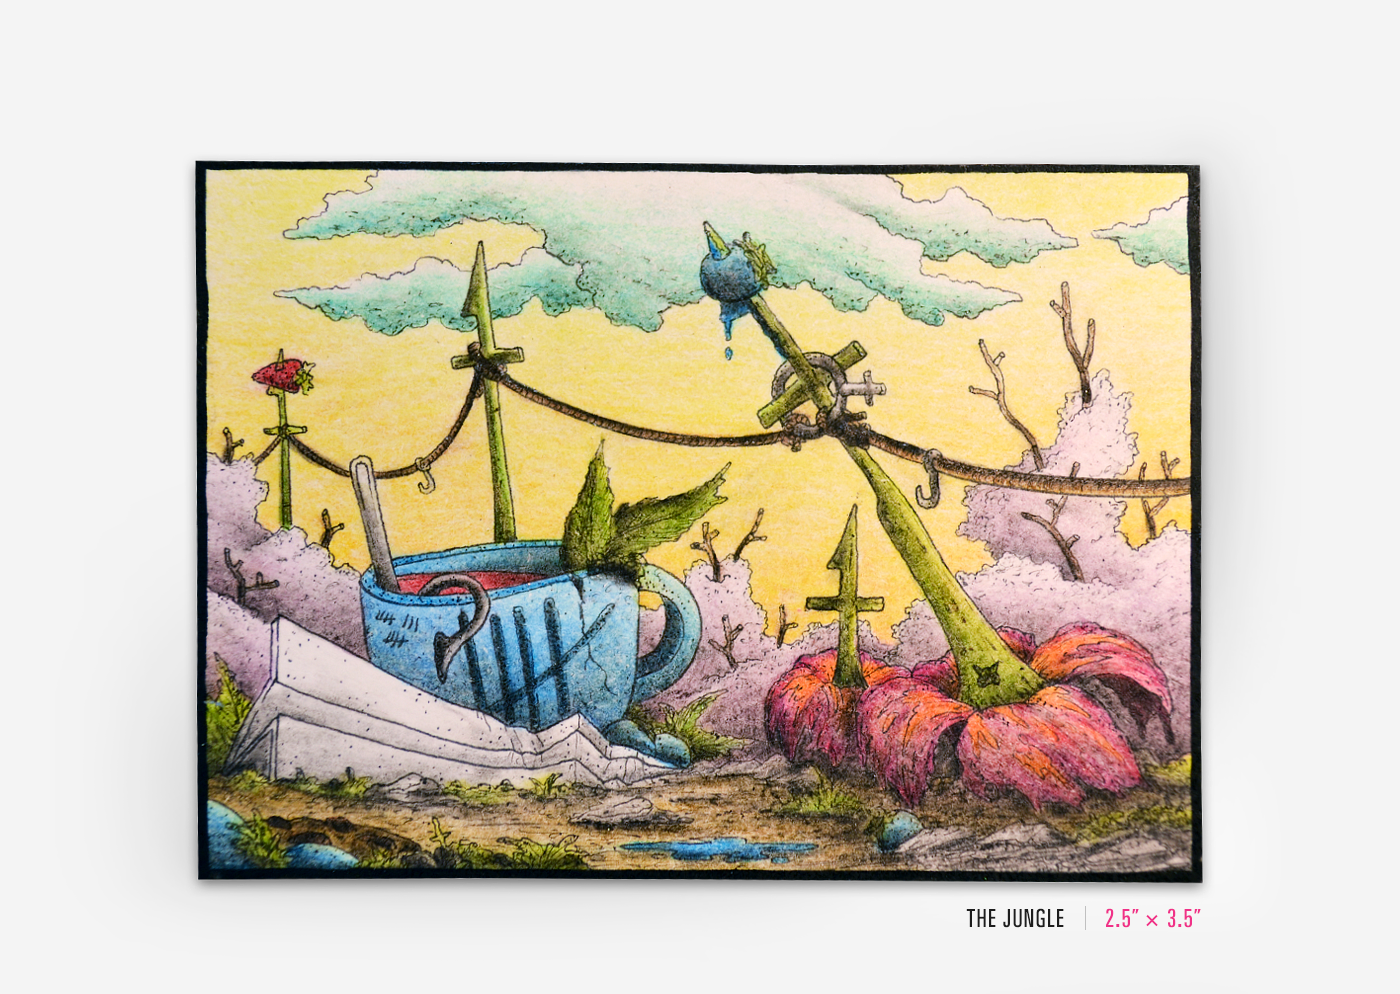 aceo art trading card pencil colored pencil ink Small Format Art Tiny fantasy ILLUSTRATION  surreal